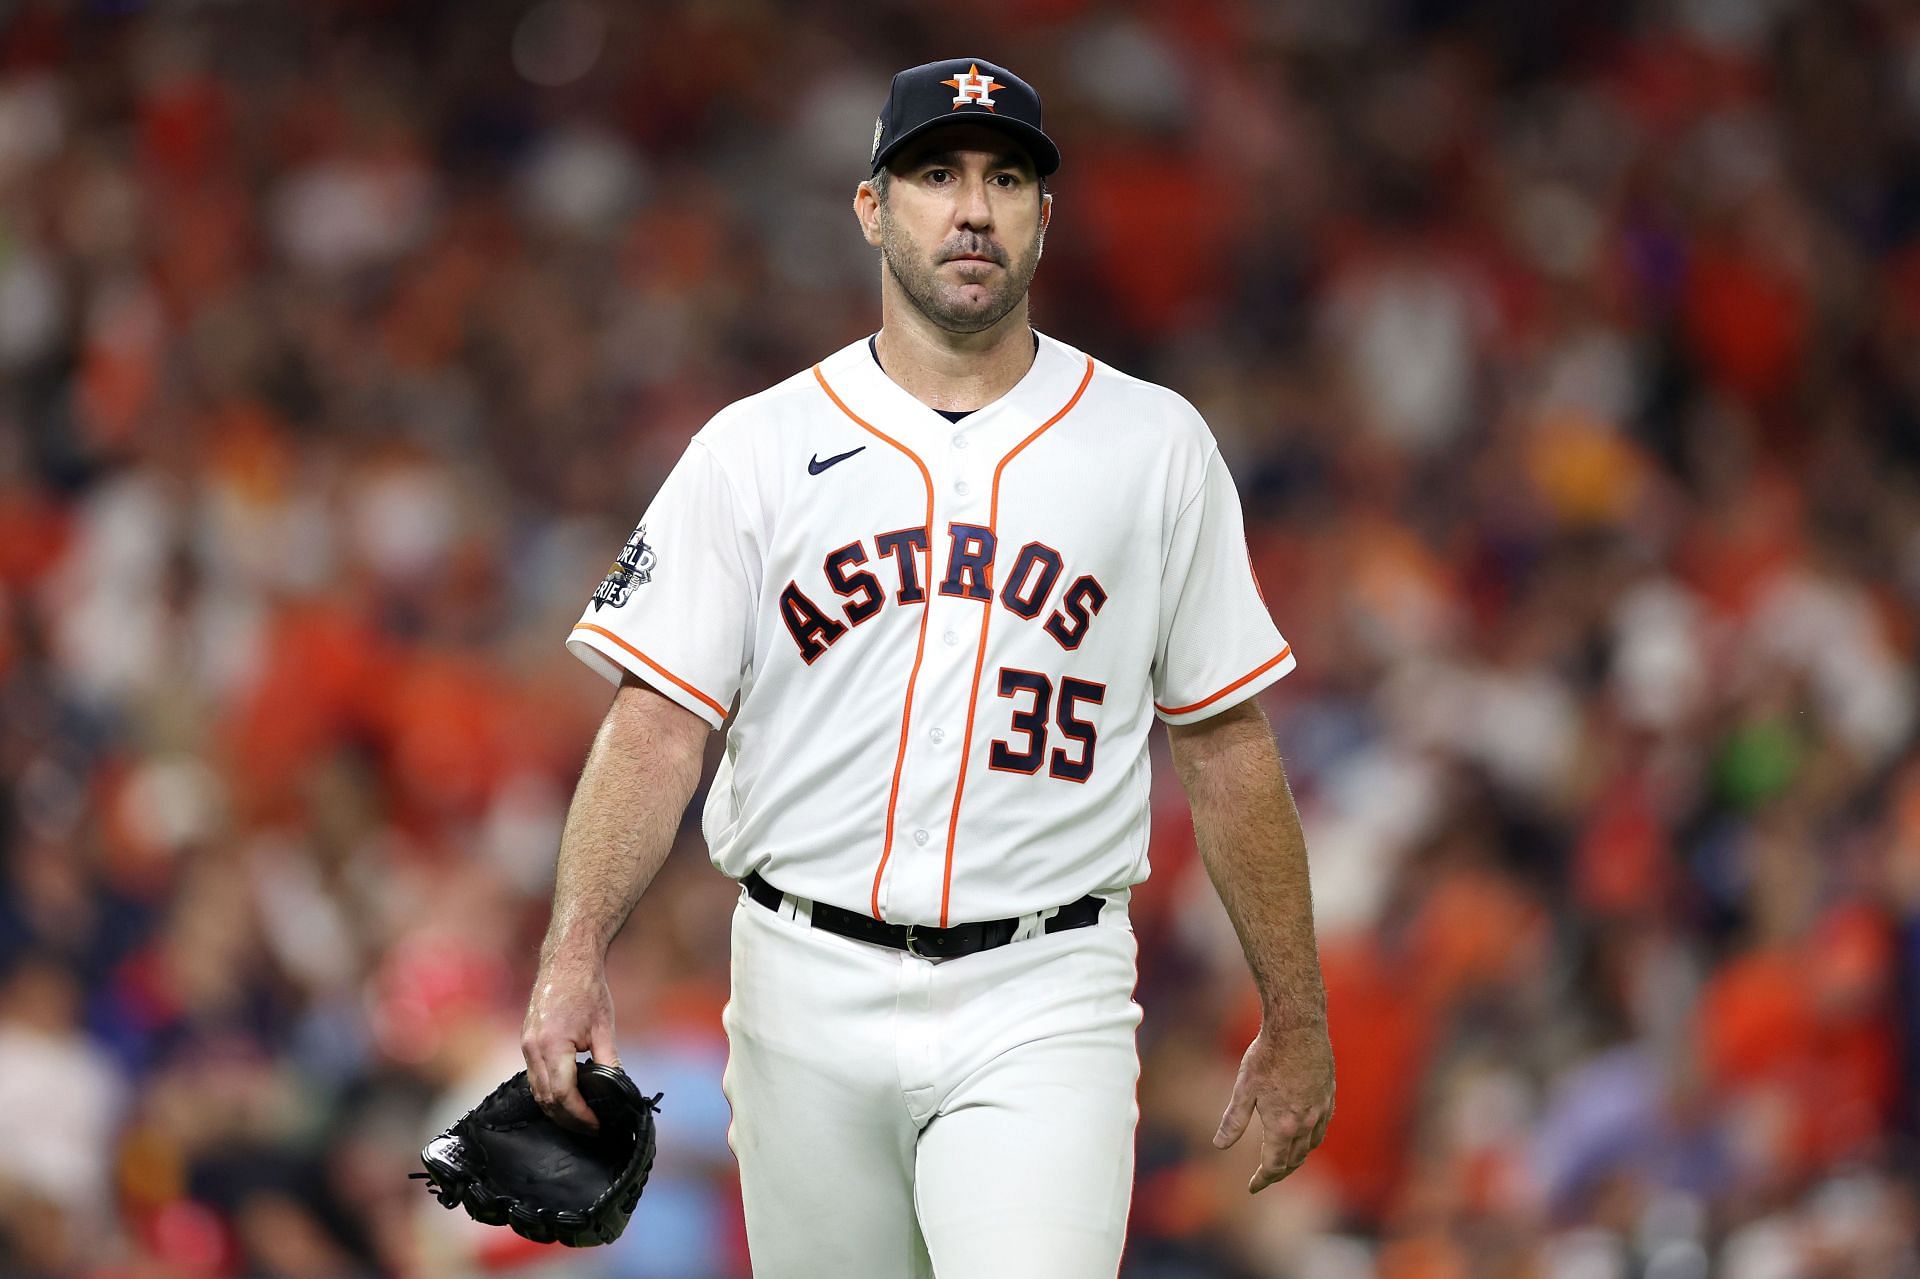 Dusty Baker had prescient quote about Justin Verlander before Game 5